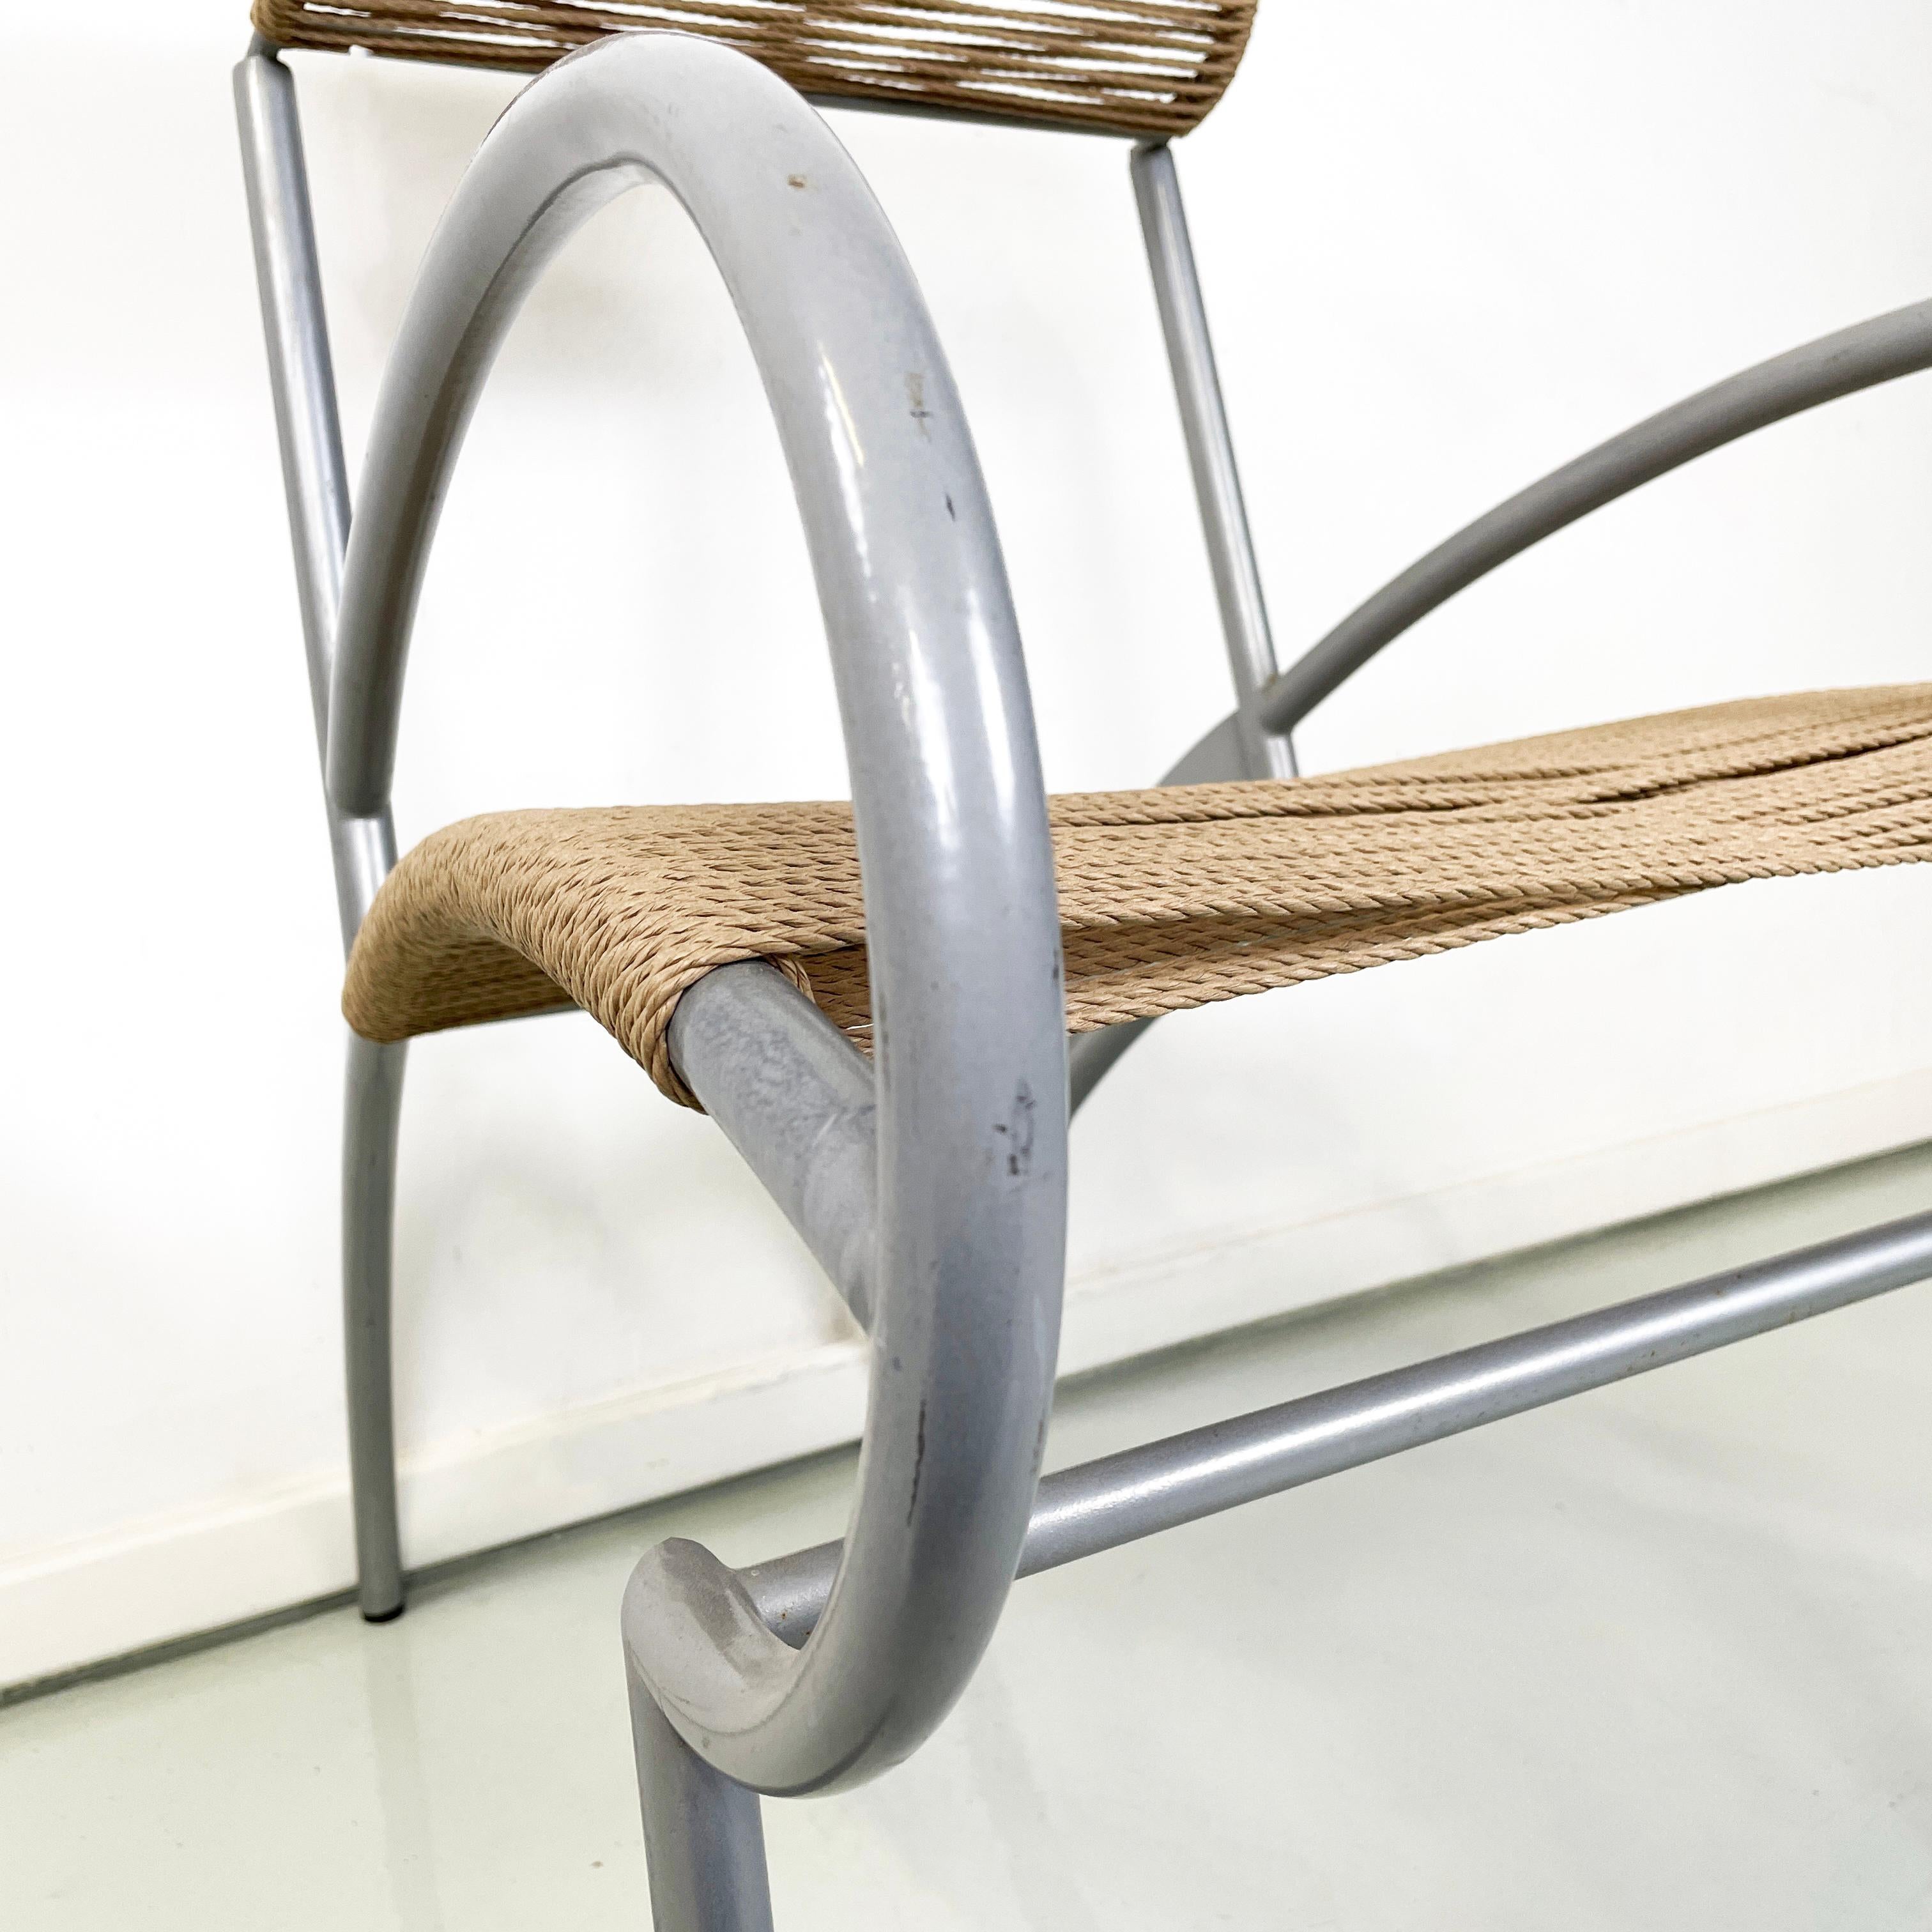 Italian modern rope and gray steel chair Juliette by Massimo Iosa-Ghini, 1990s For Sale 3